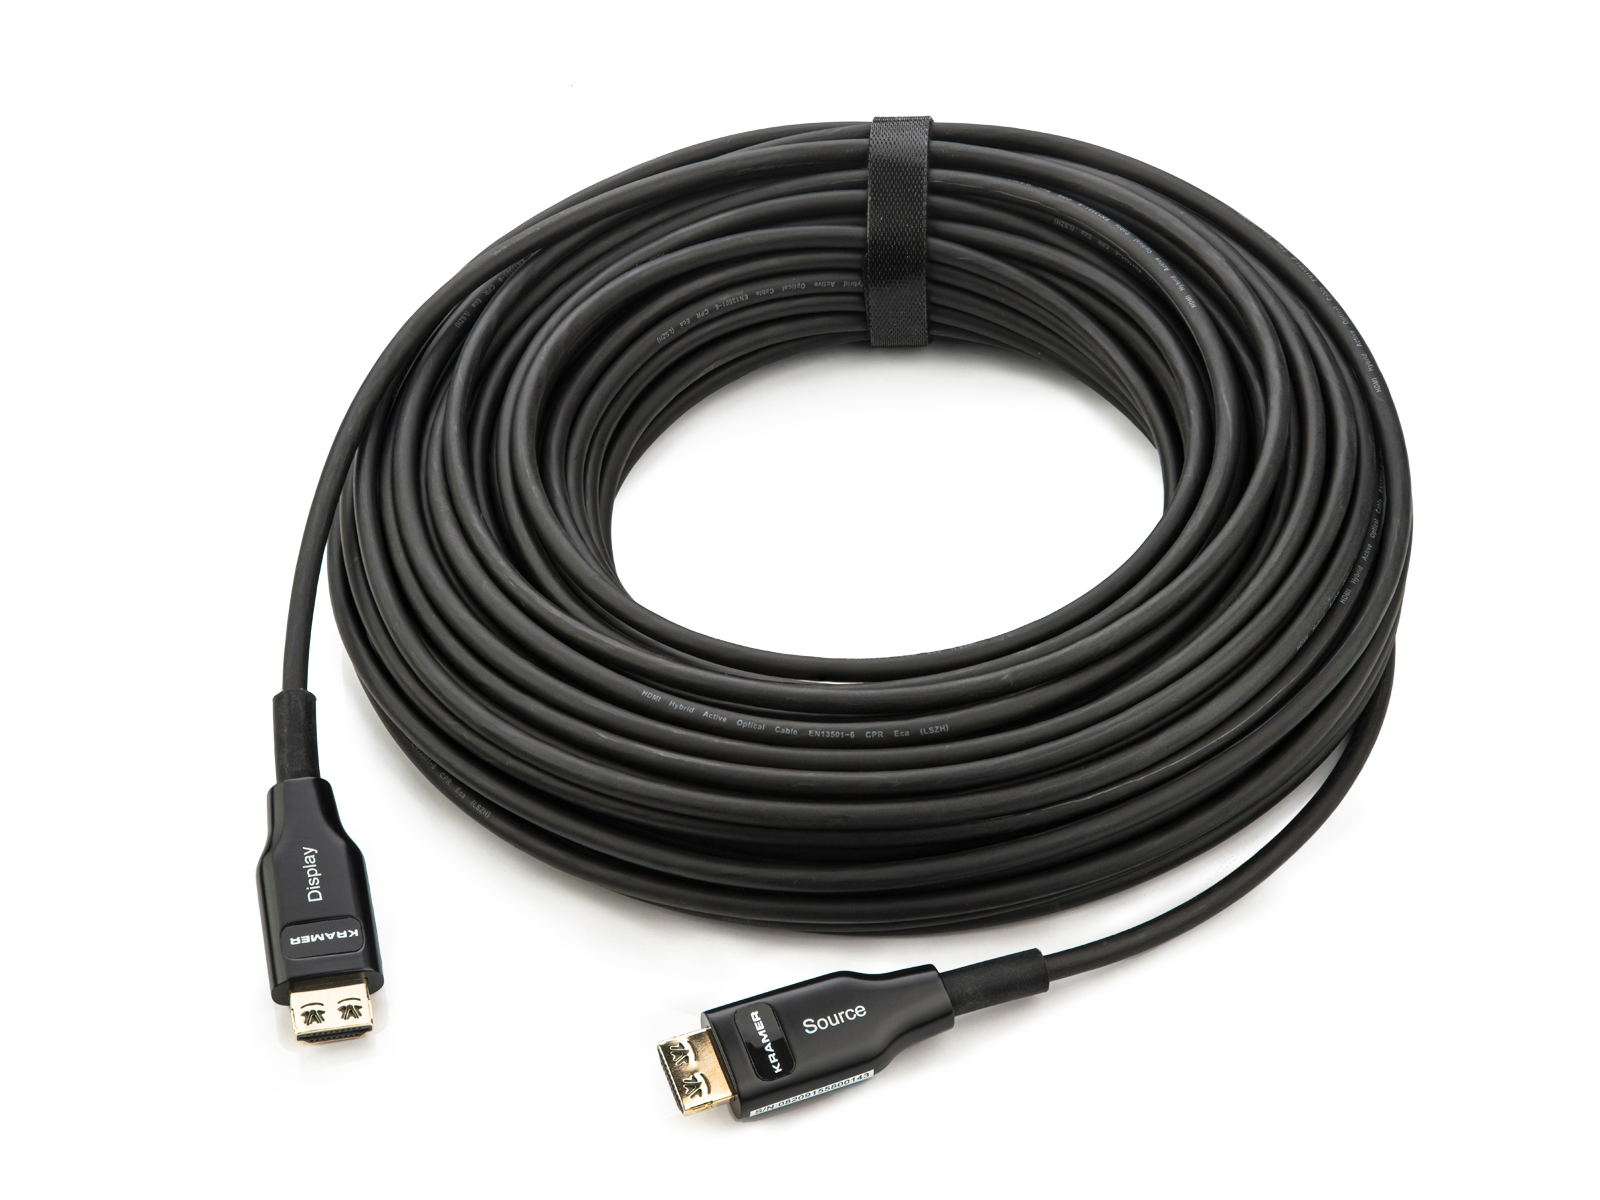 CP-AOCH/UF-33 10m/33ft Ultra High-Speed HDMI Optic Hybrid Cable - Plenum Rated by Kramer